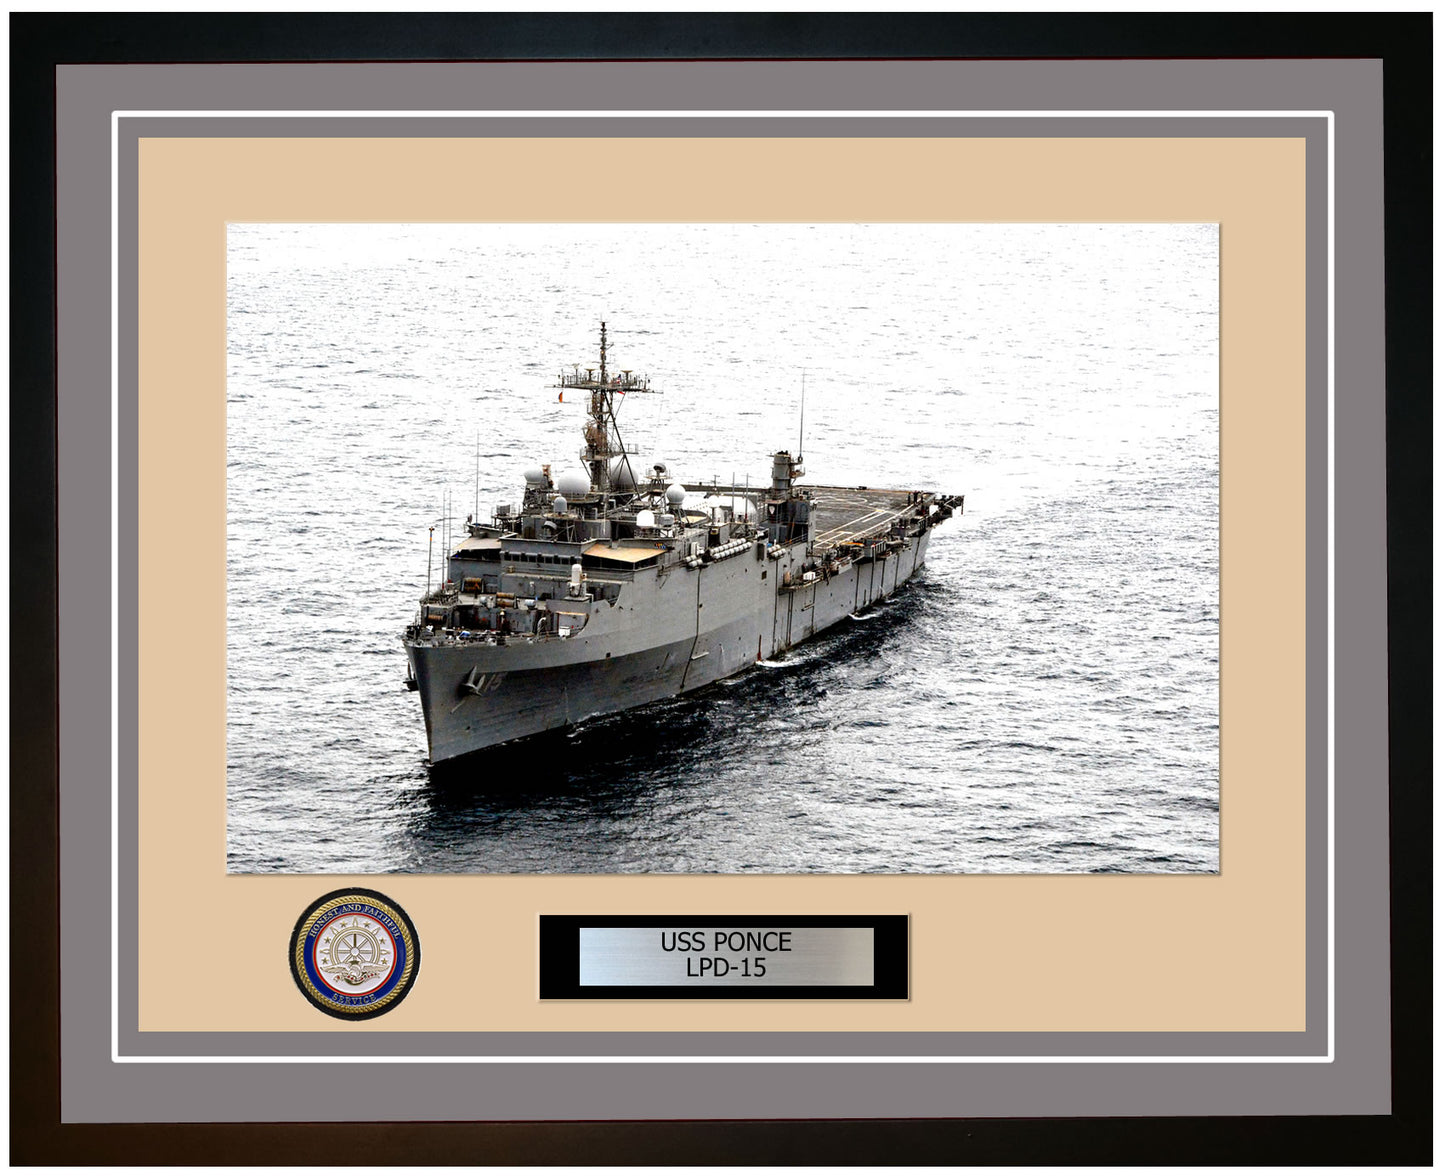 USS Ponce LPD-15 Framed Navy Ship Photo Grey